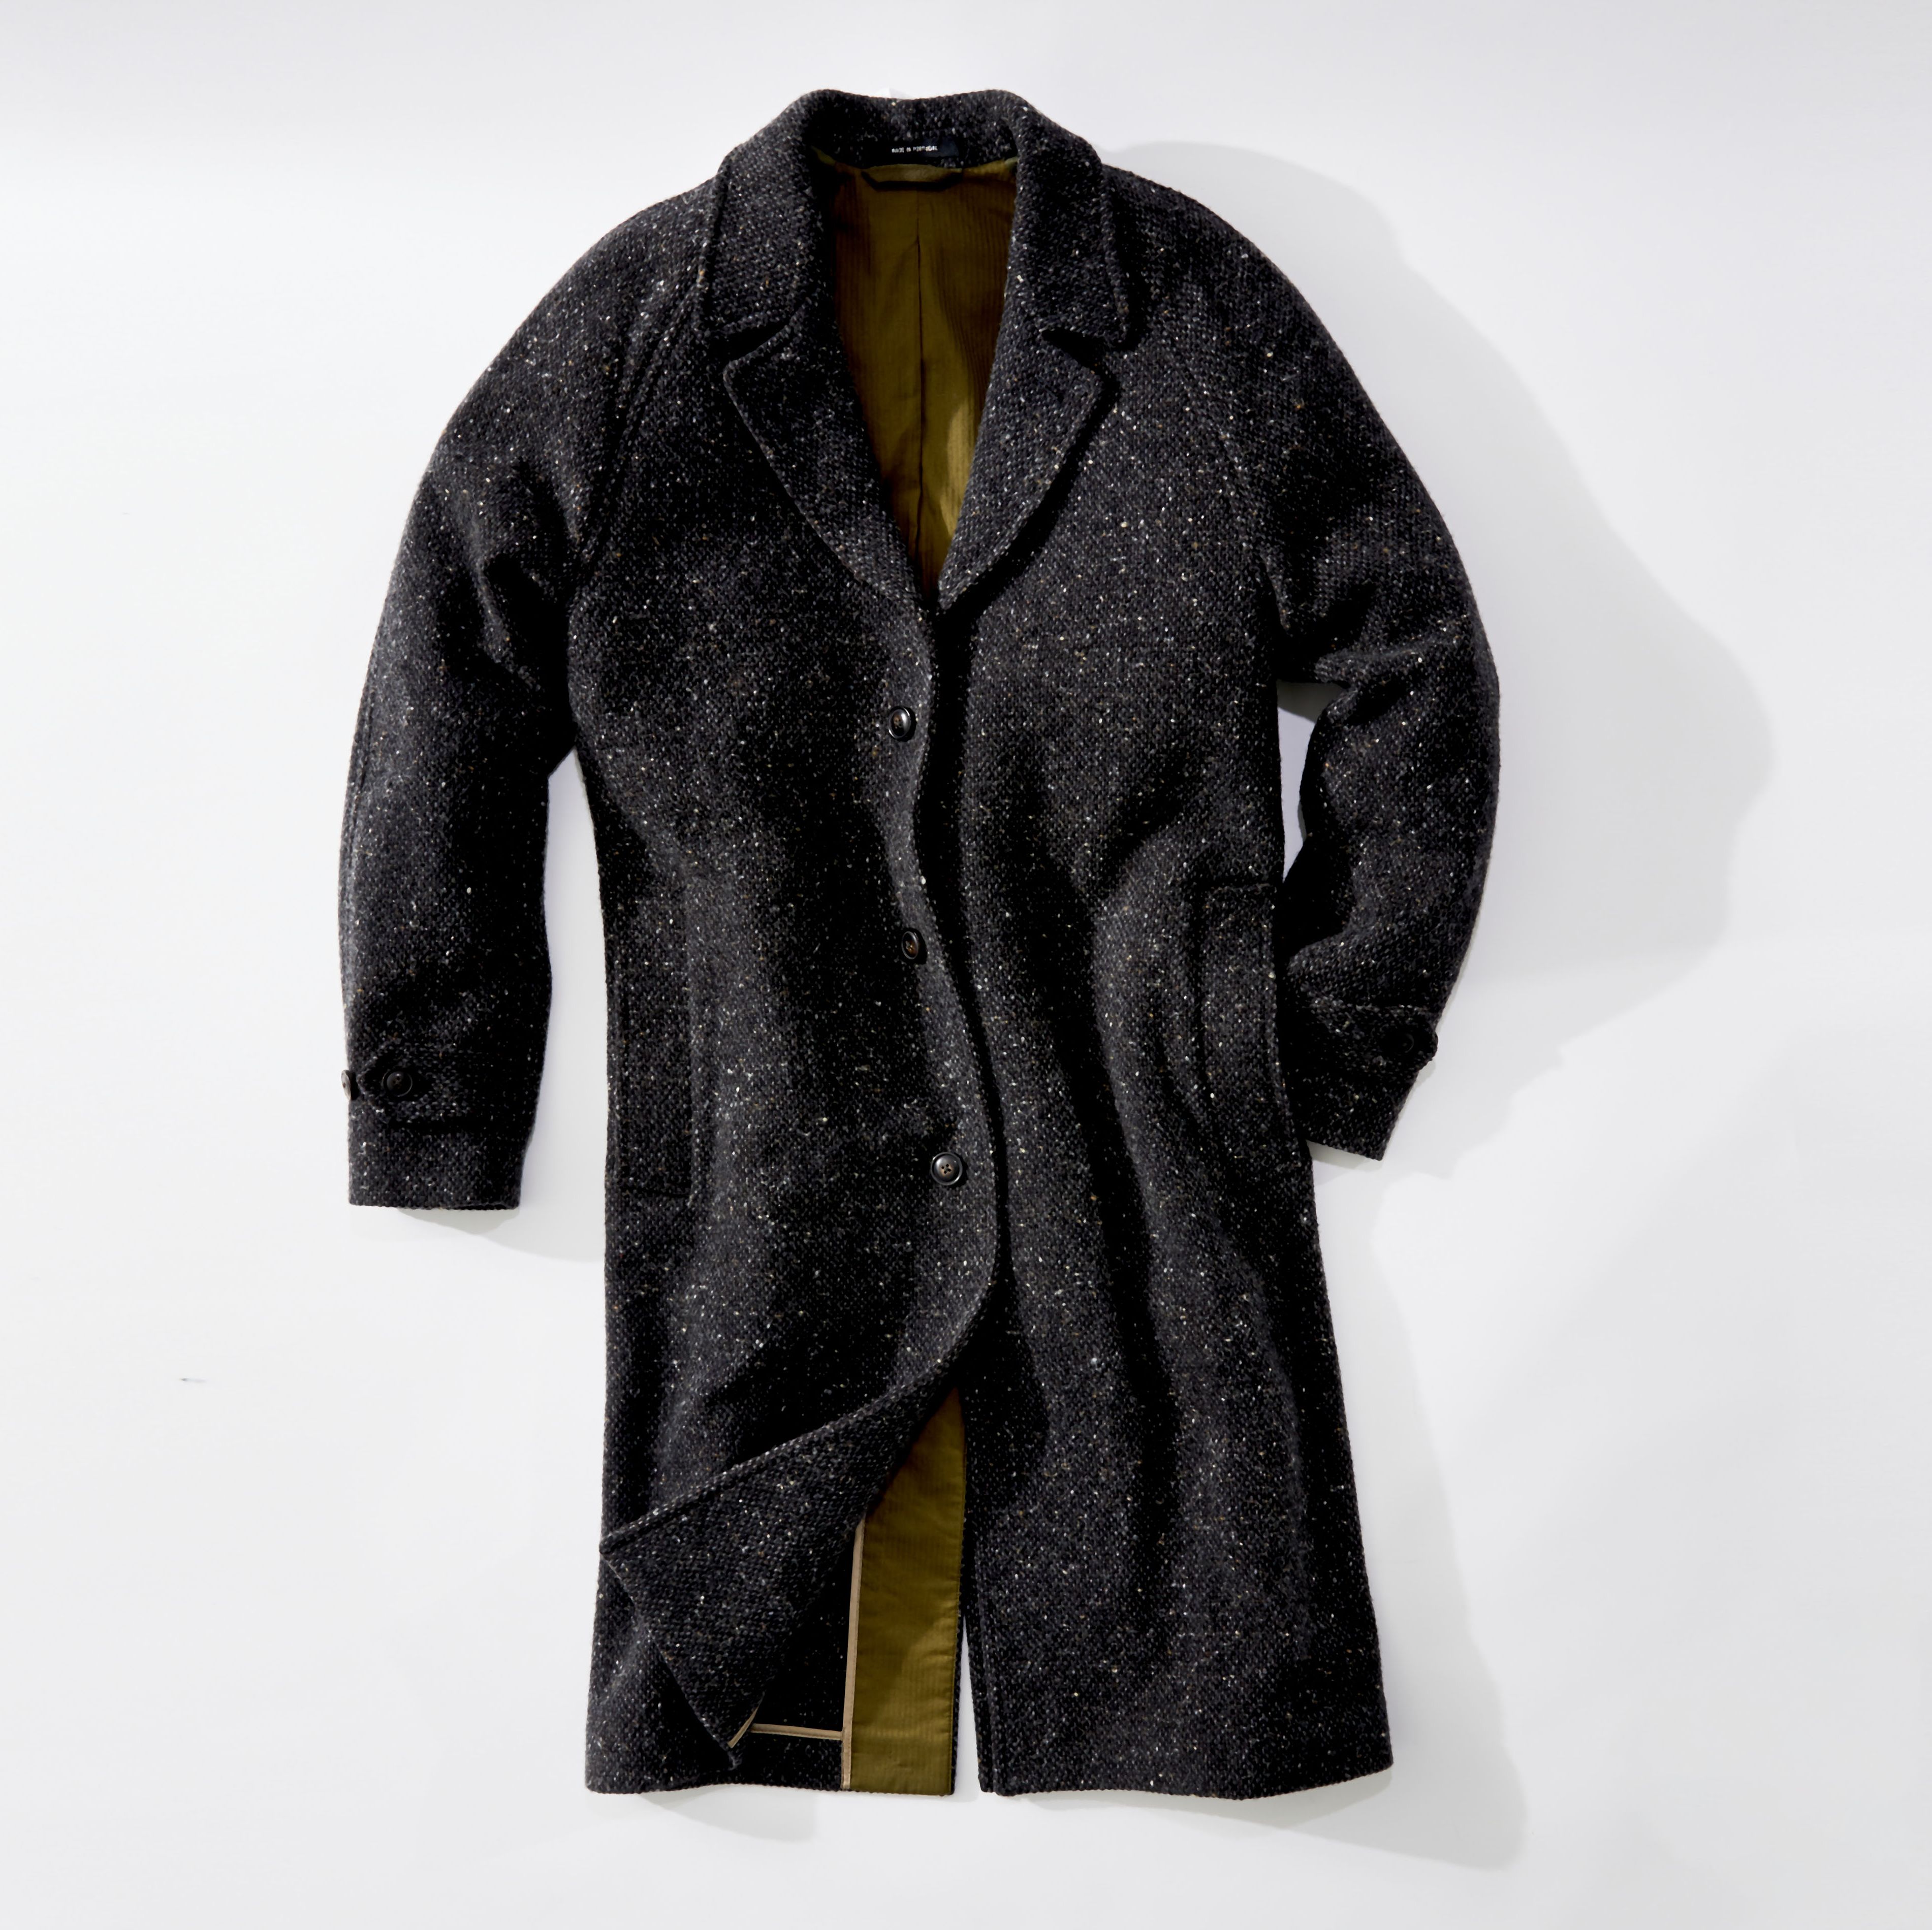 Say Hello to Your Now and Forever Coat